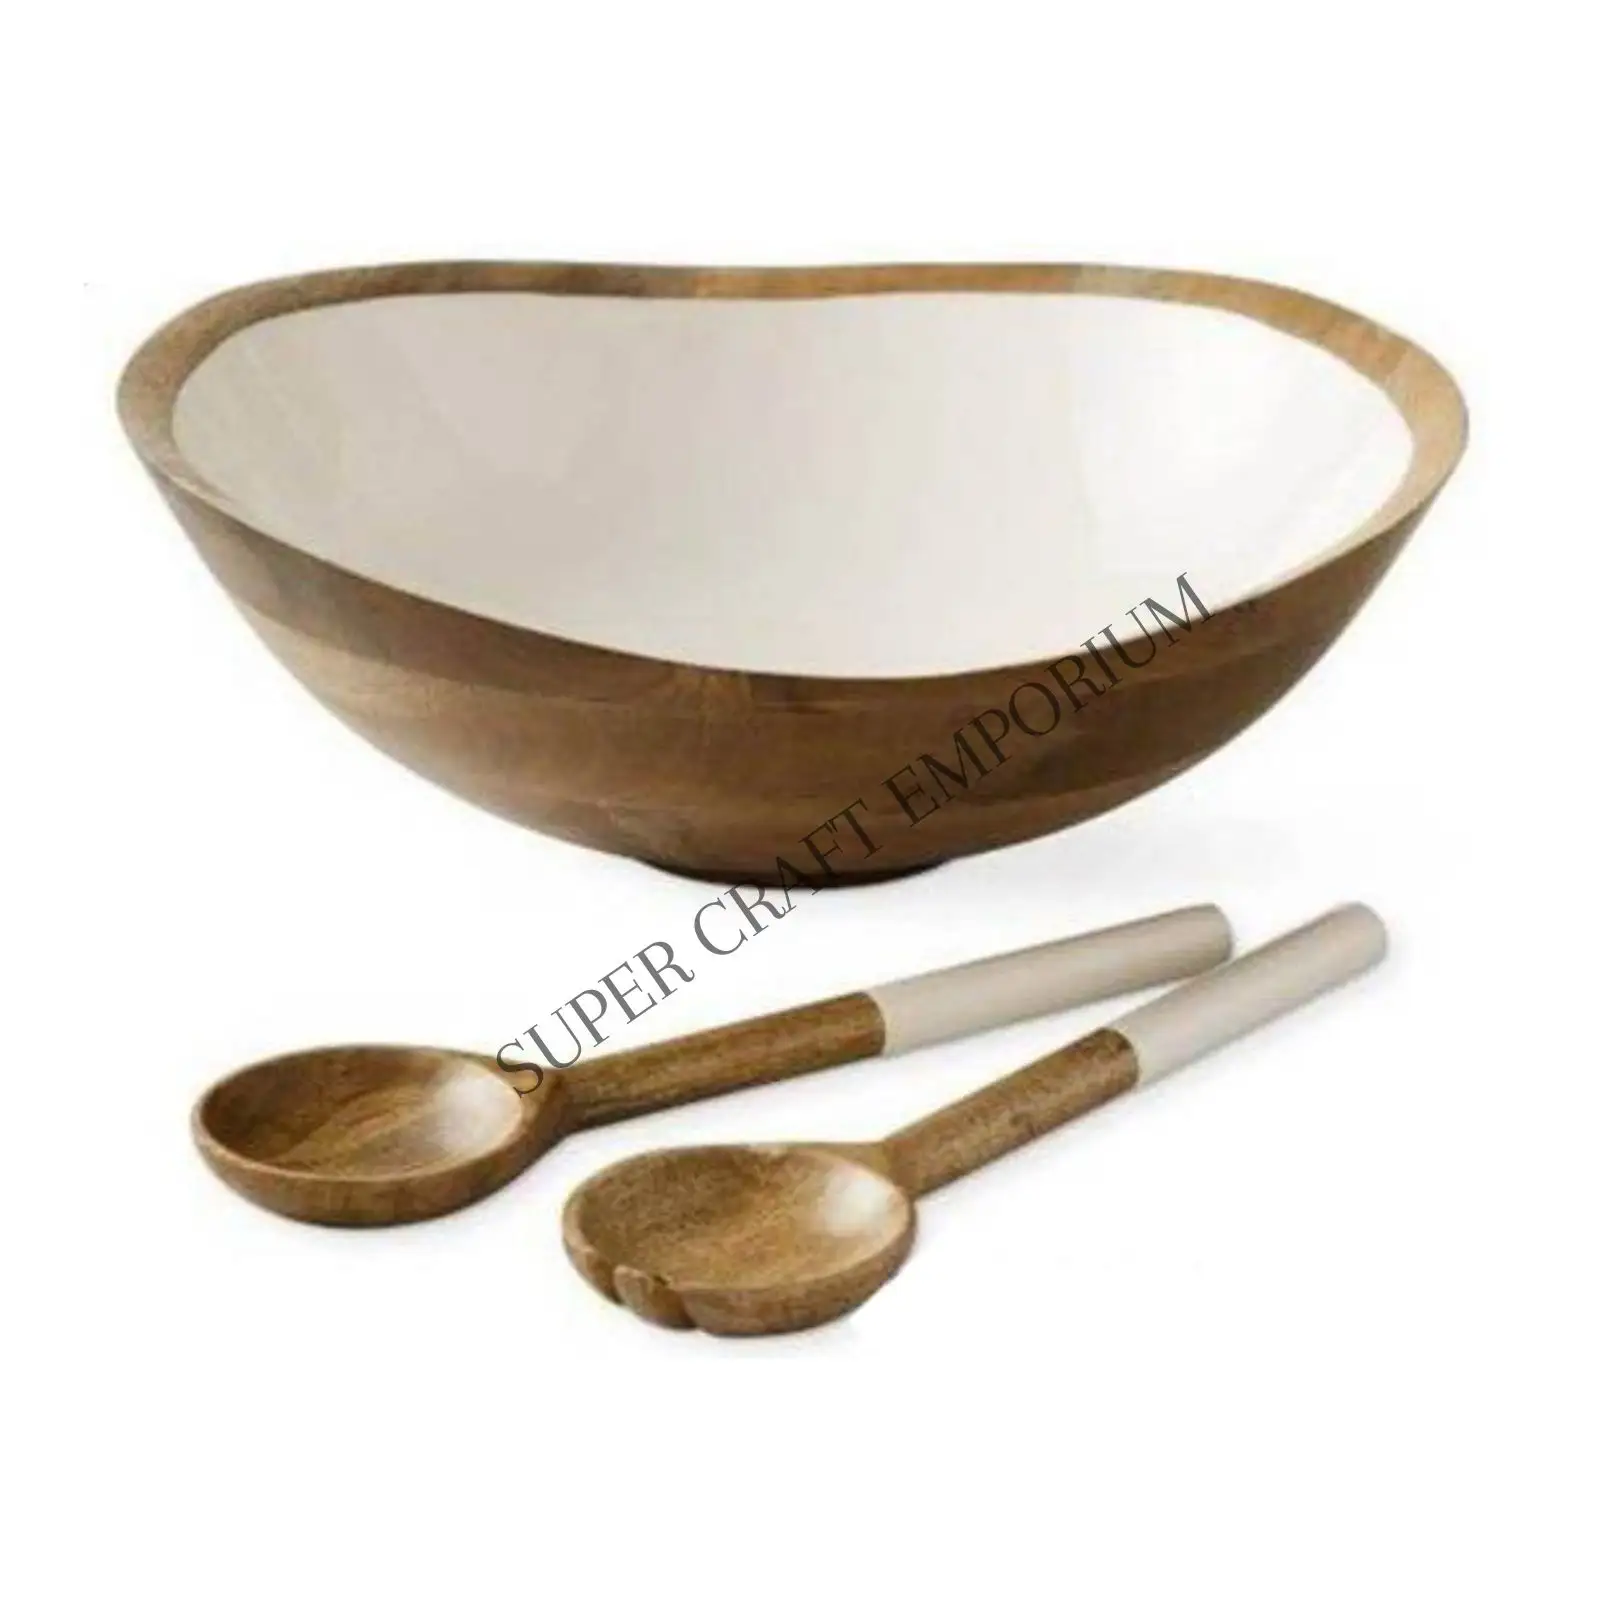 Wholesale Customized Handmade Mango Wood Enameled Bowl W/ Derver for Multipurpose Use and with best quality